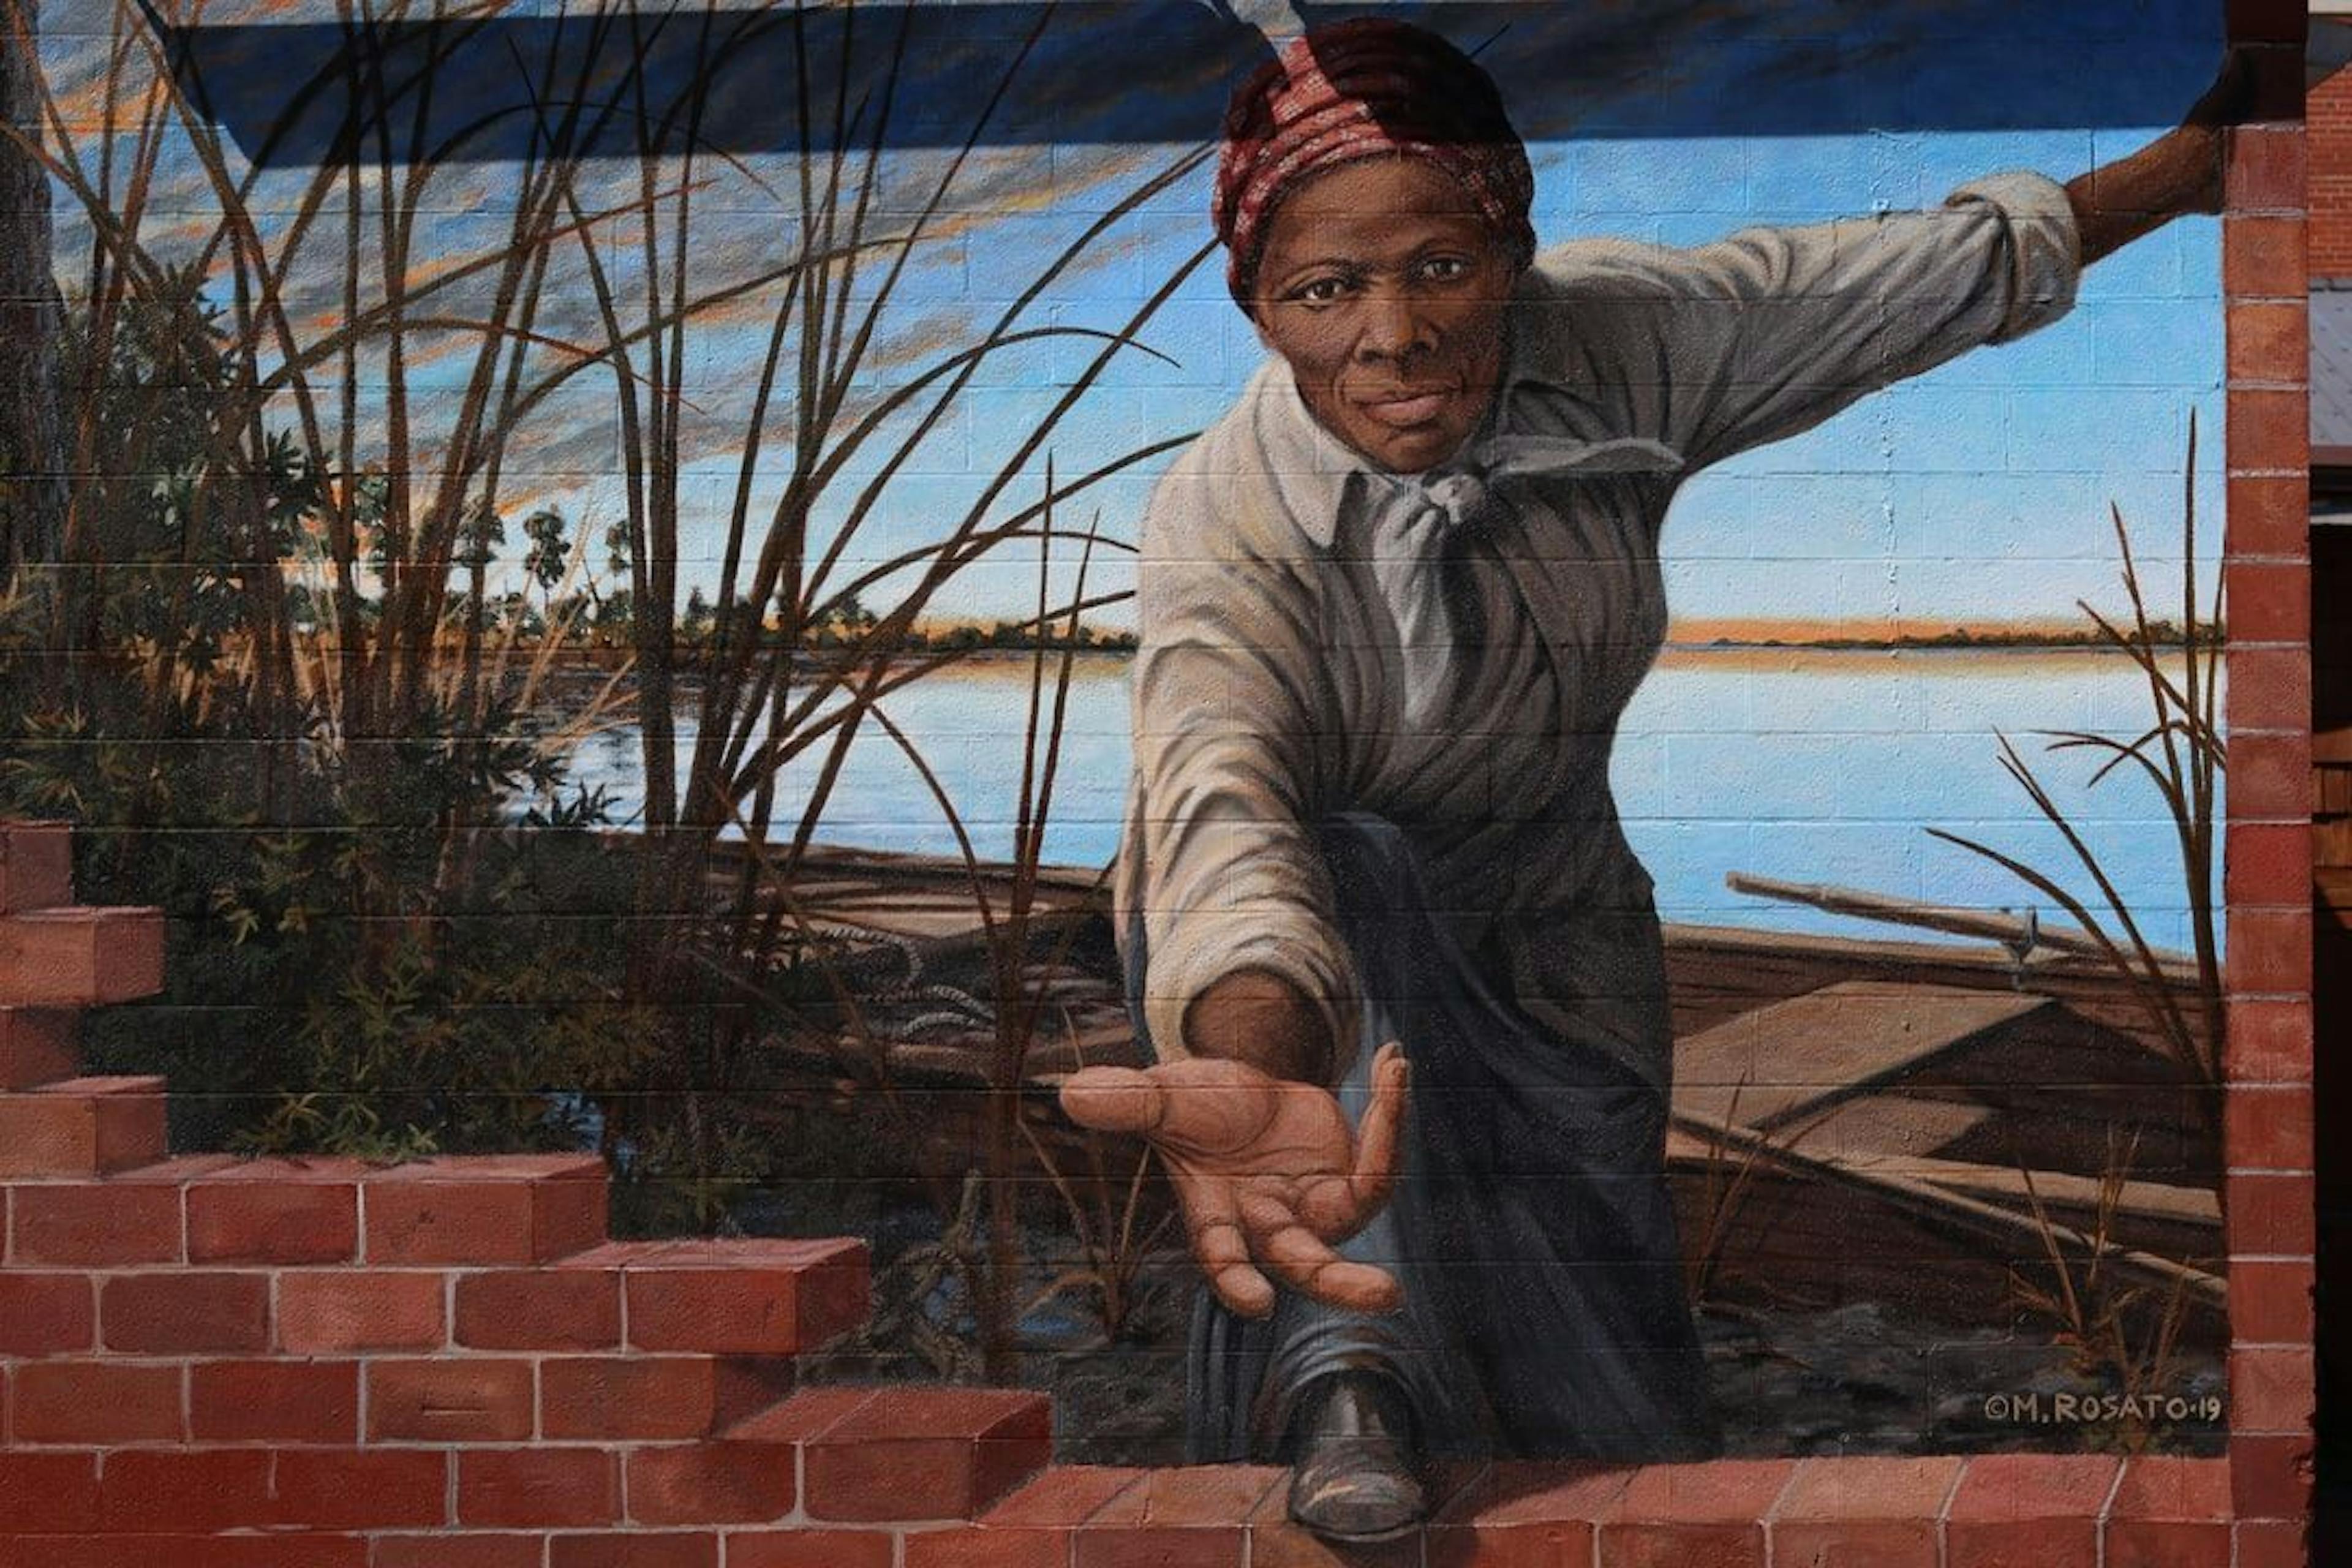 /america-needs-harriet-tubman-this-juneteenth-and-every-day-afterwards-ra1f37bk feature image